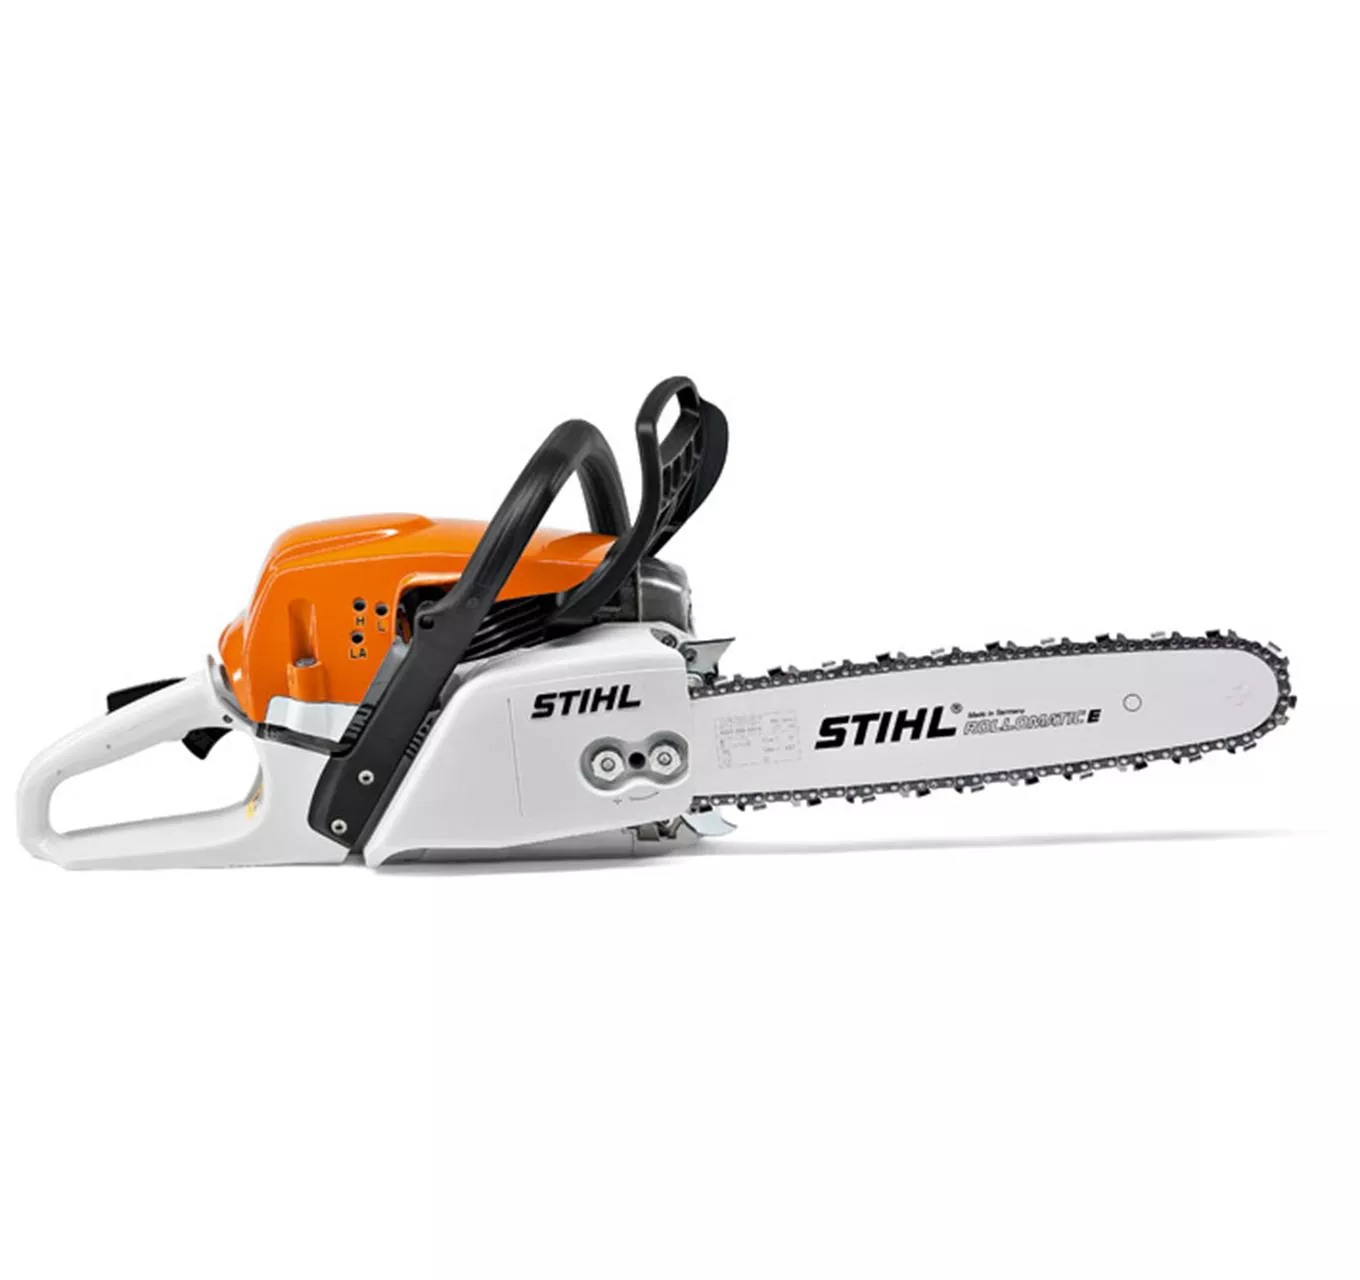 MS 271 Chainsaw 18"